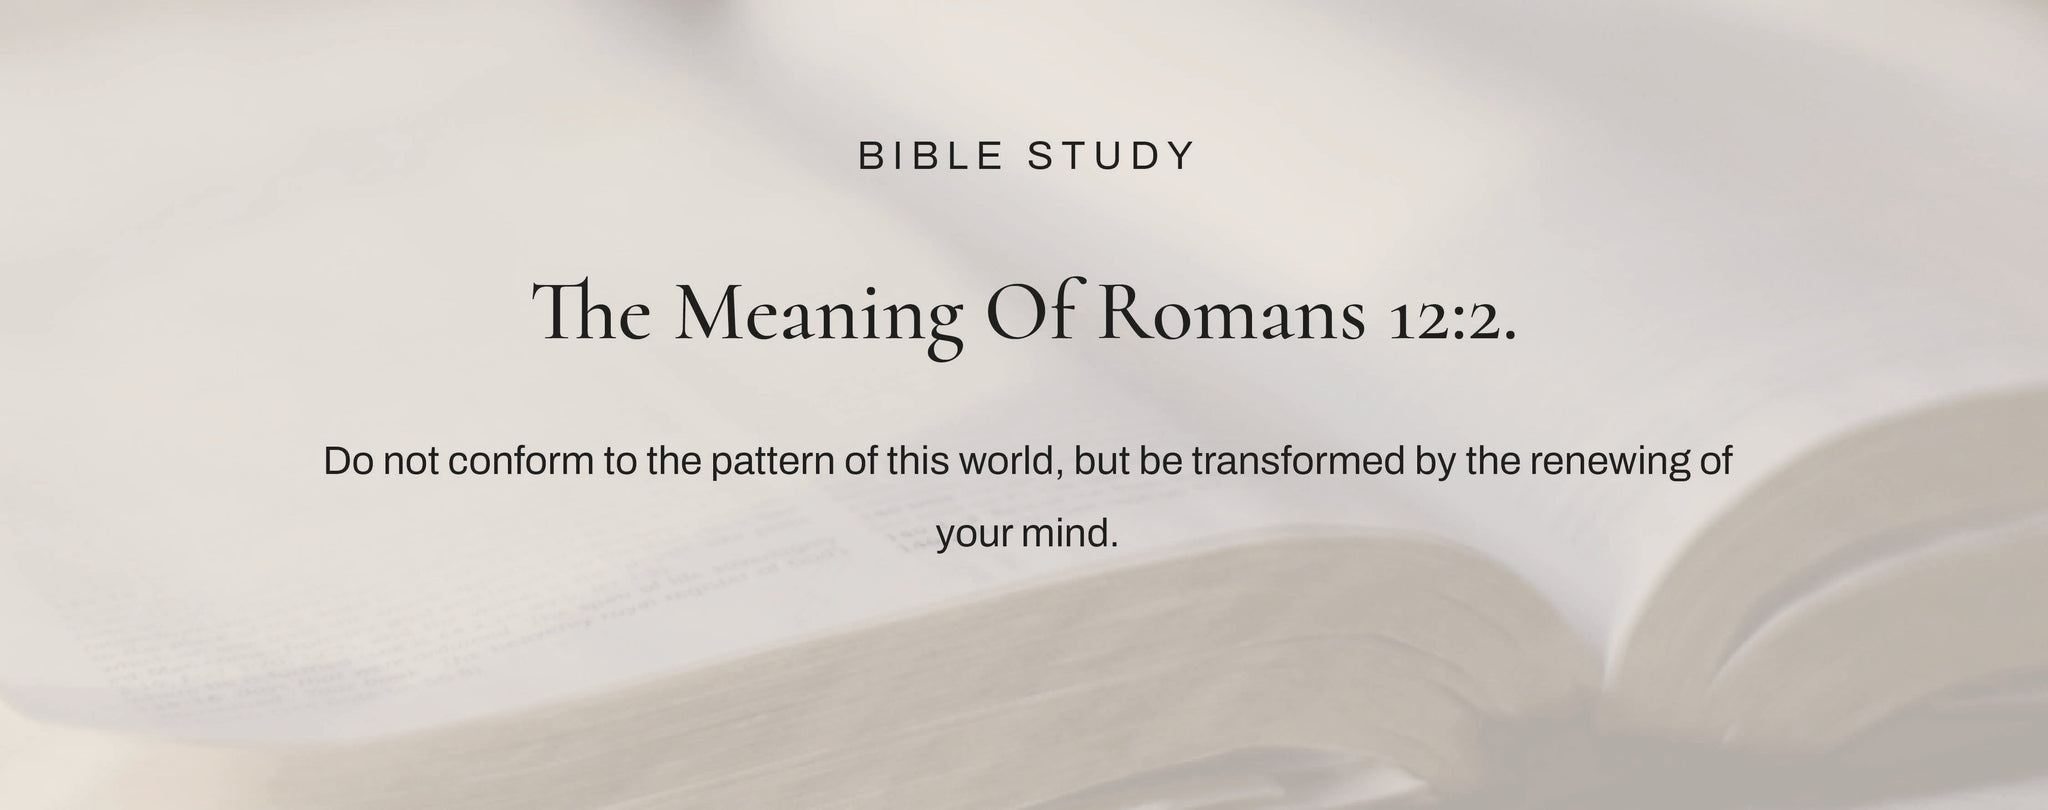 What Does Romans 12:2 Mean?